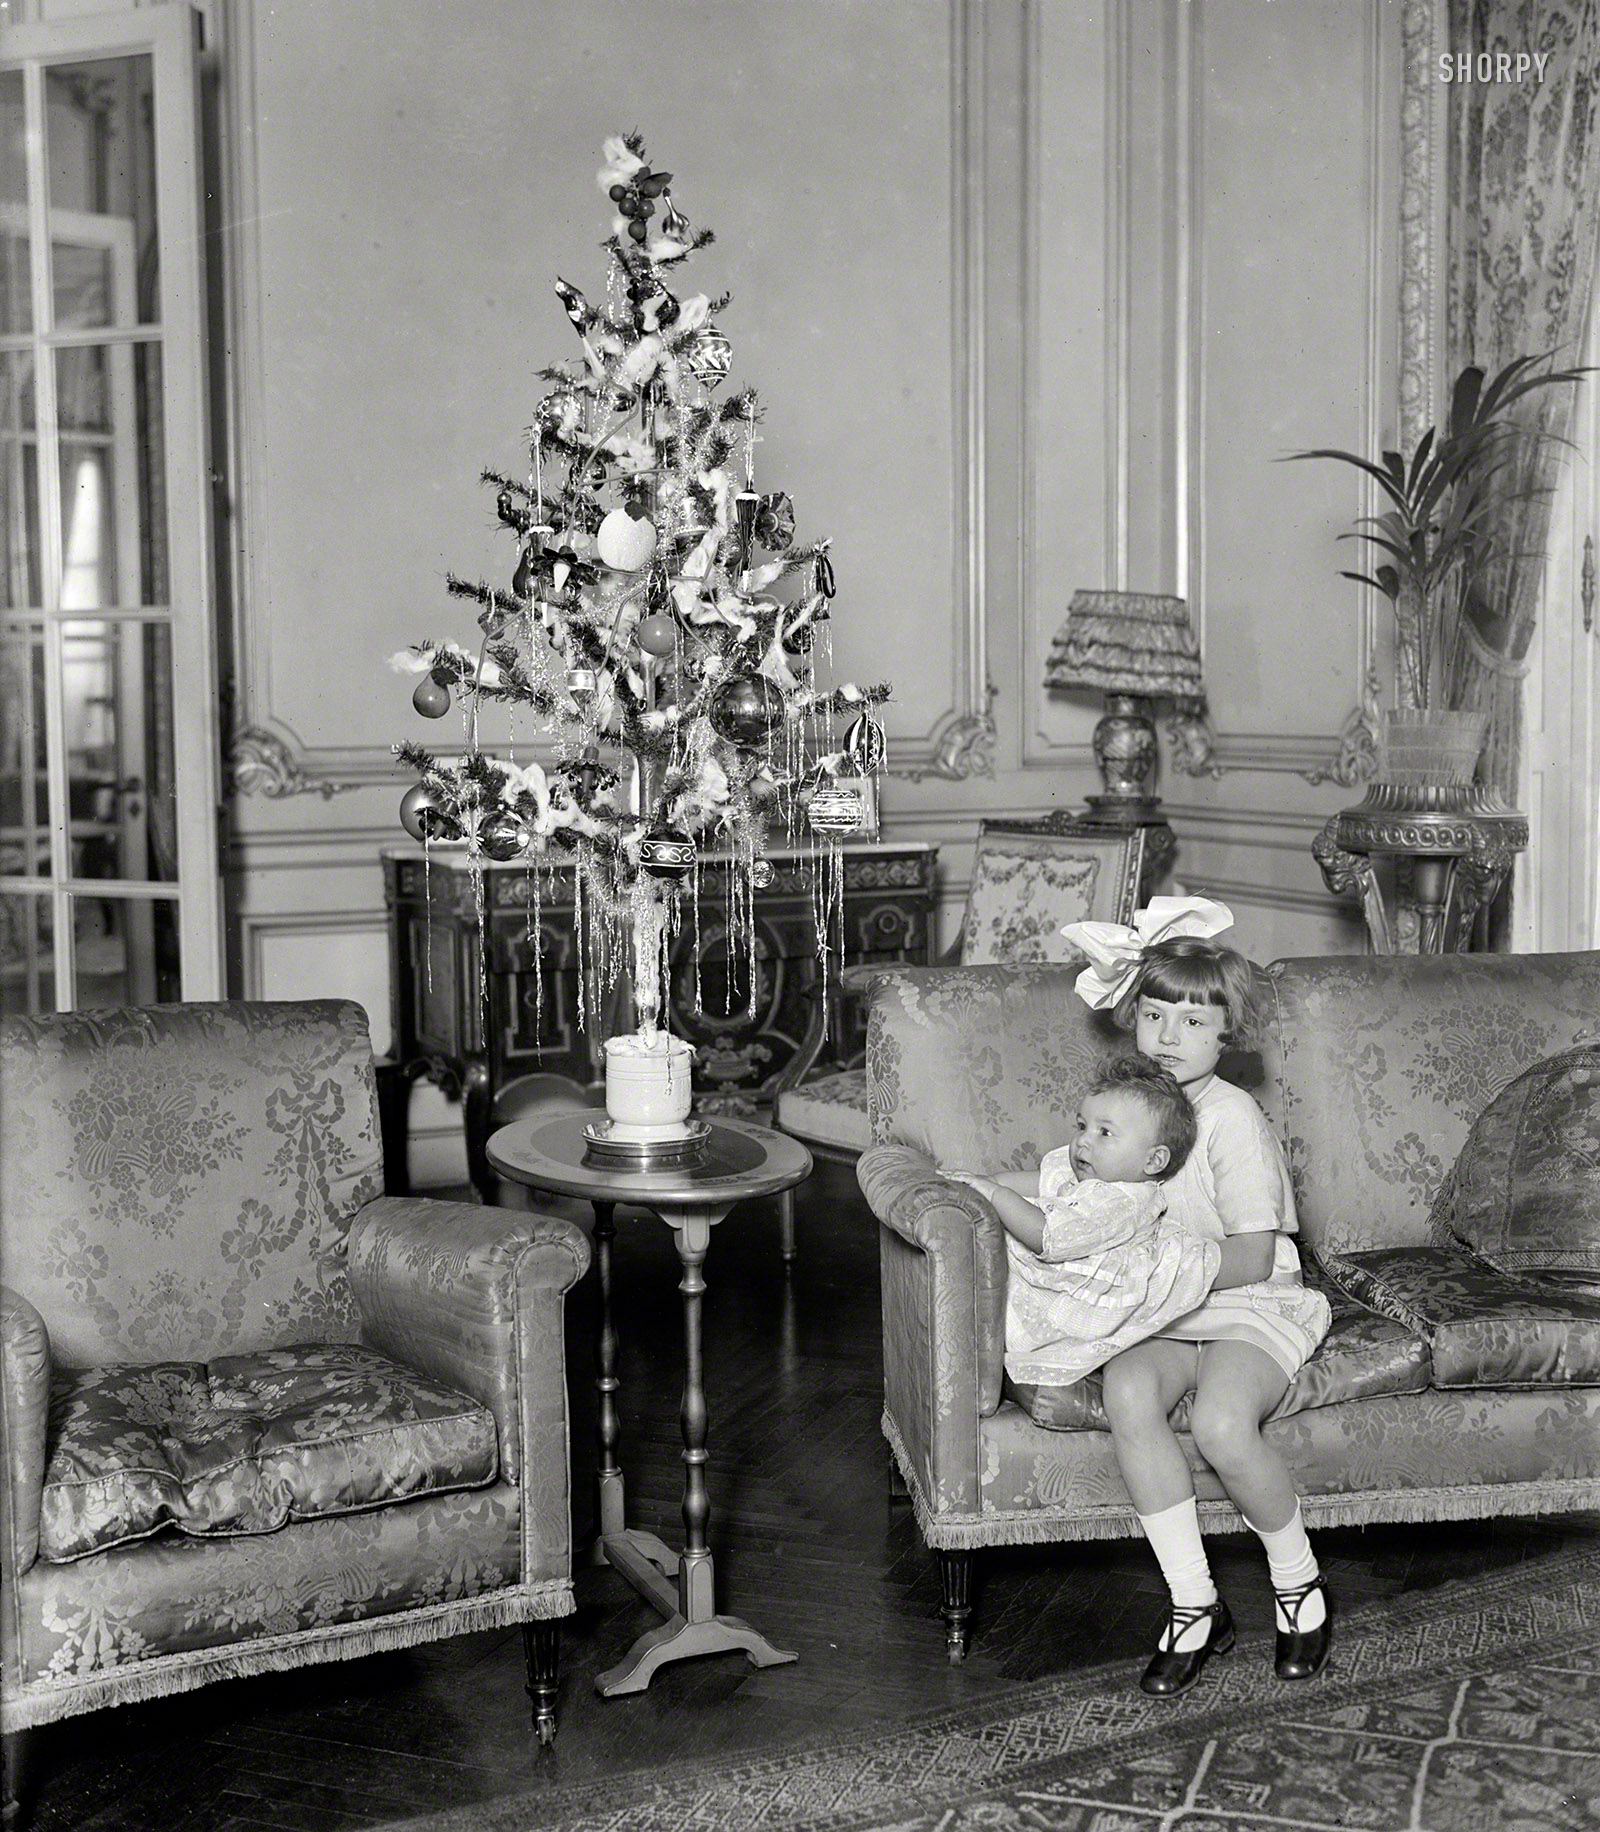 December 26, 1924. Washington, D.C. "Nevine and Nemai Yousry." Children of the Egyptian ambassador and their Christmas tree. View full size.